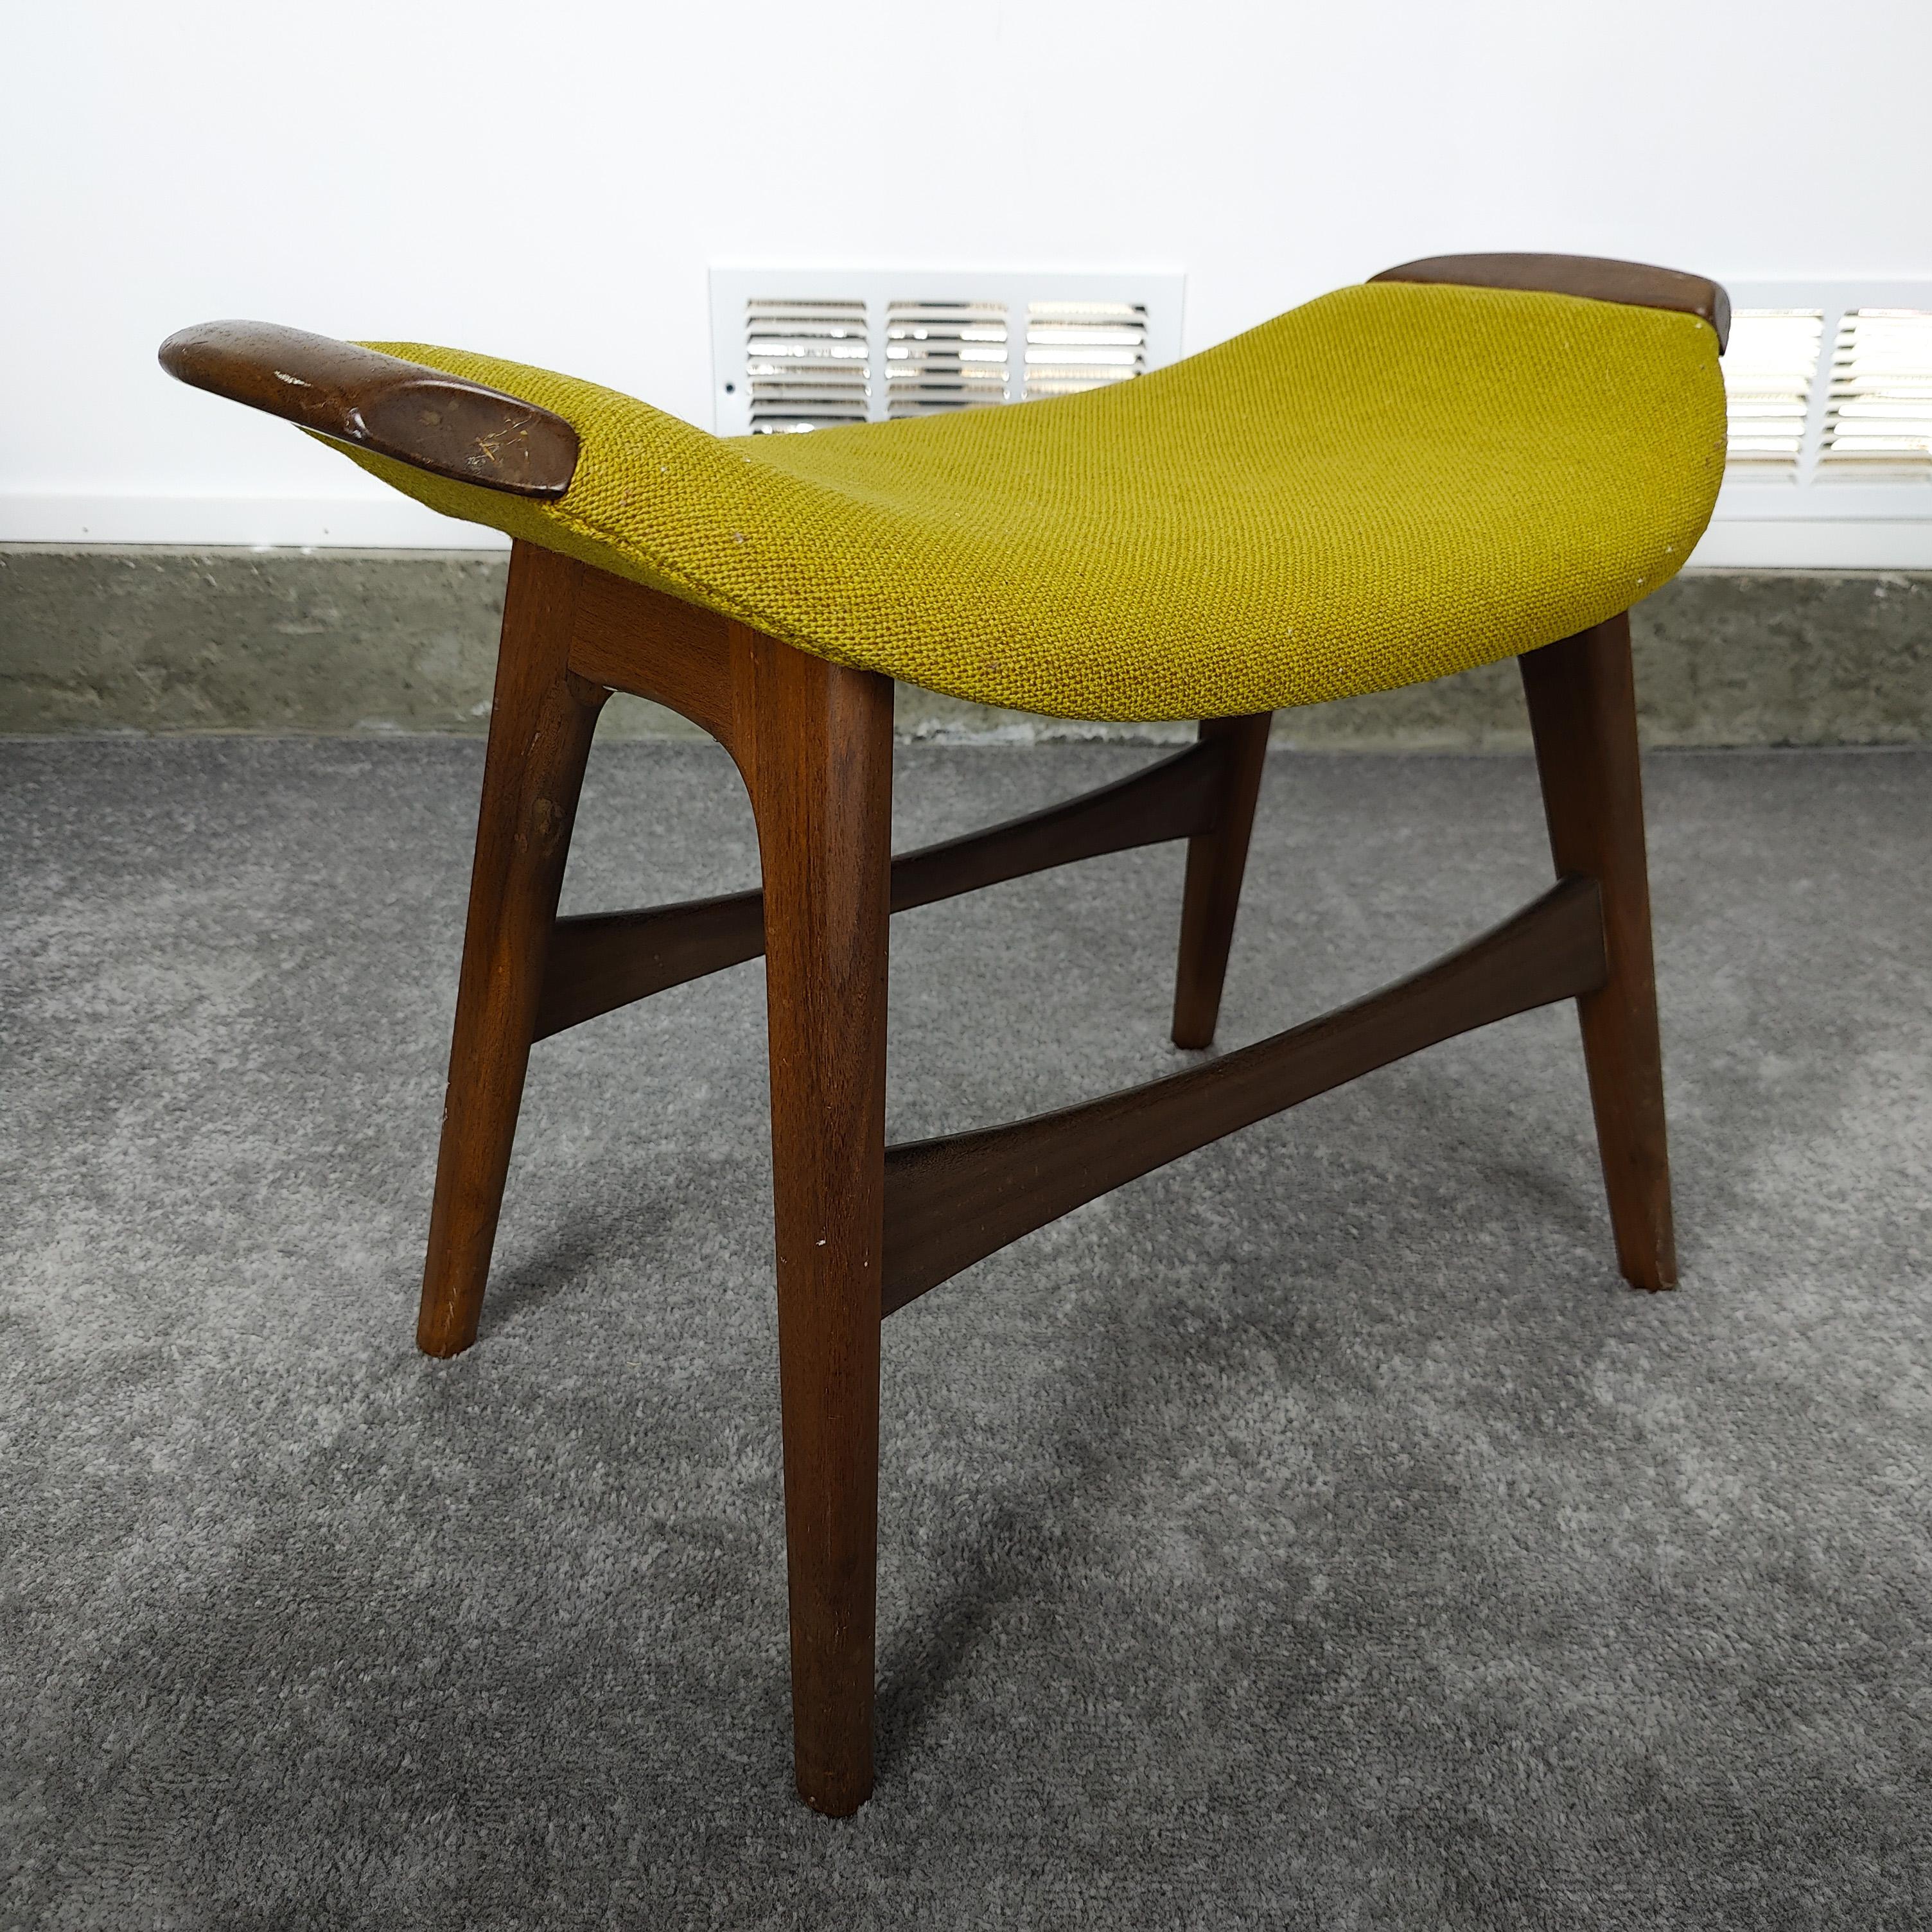 Mid-20th Century Vintage Midcentury Lounge Chair W/ Ottoman by Arnt Lande for Stokke Fabrikker